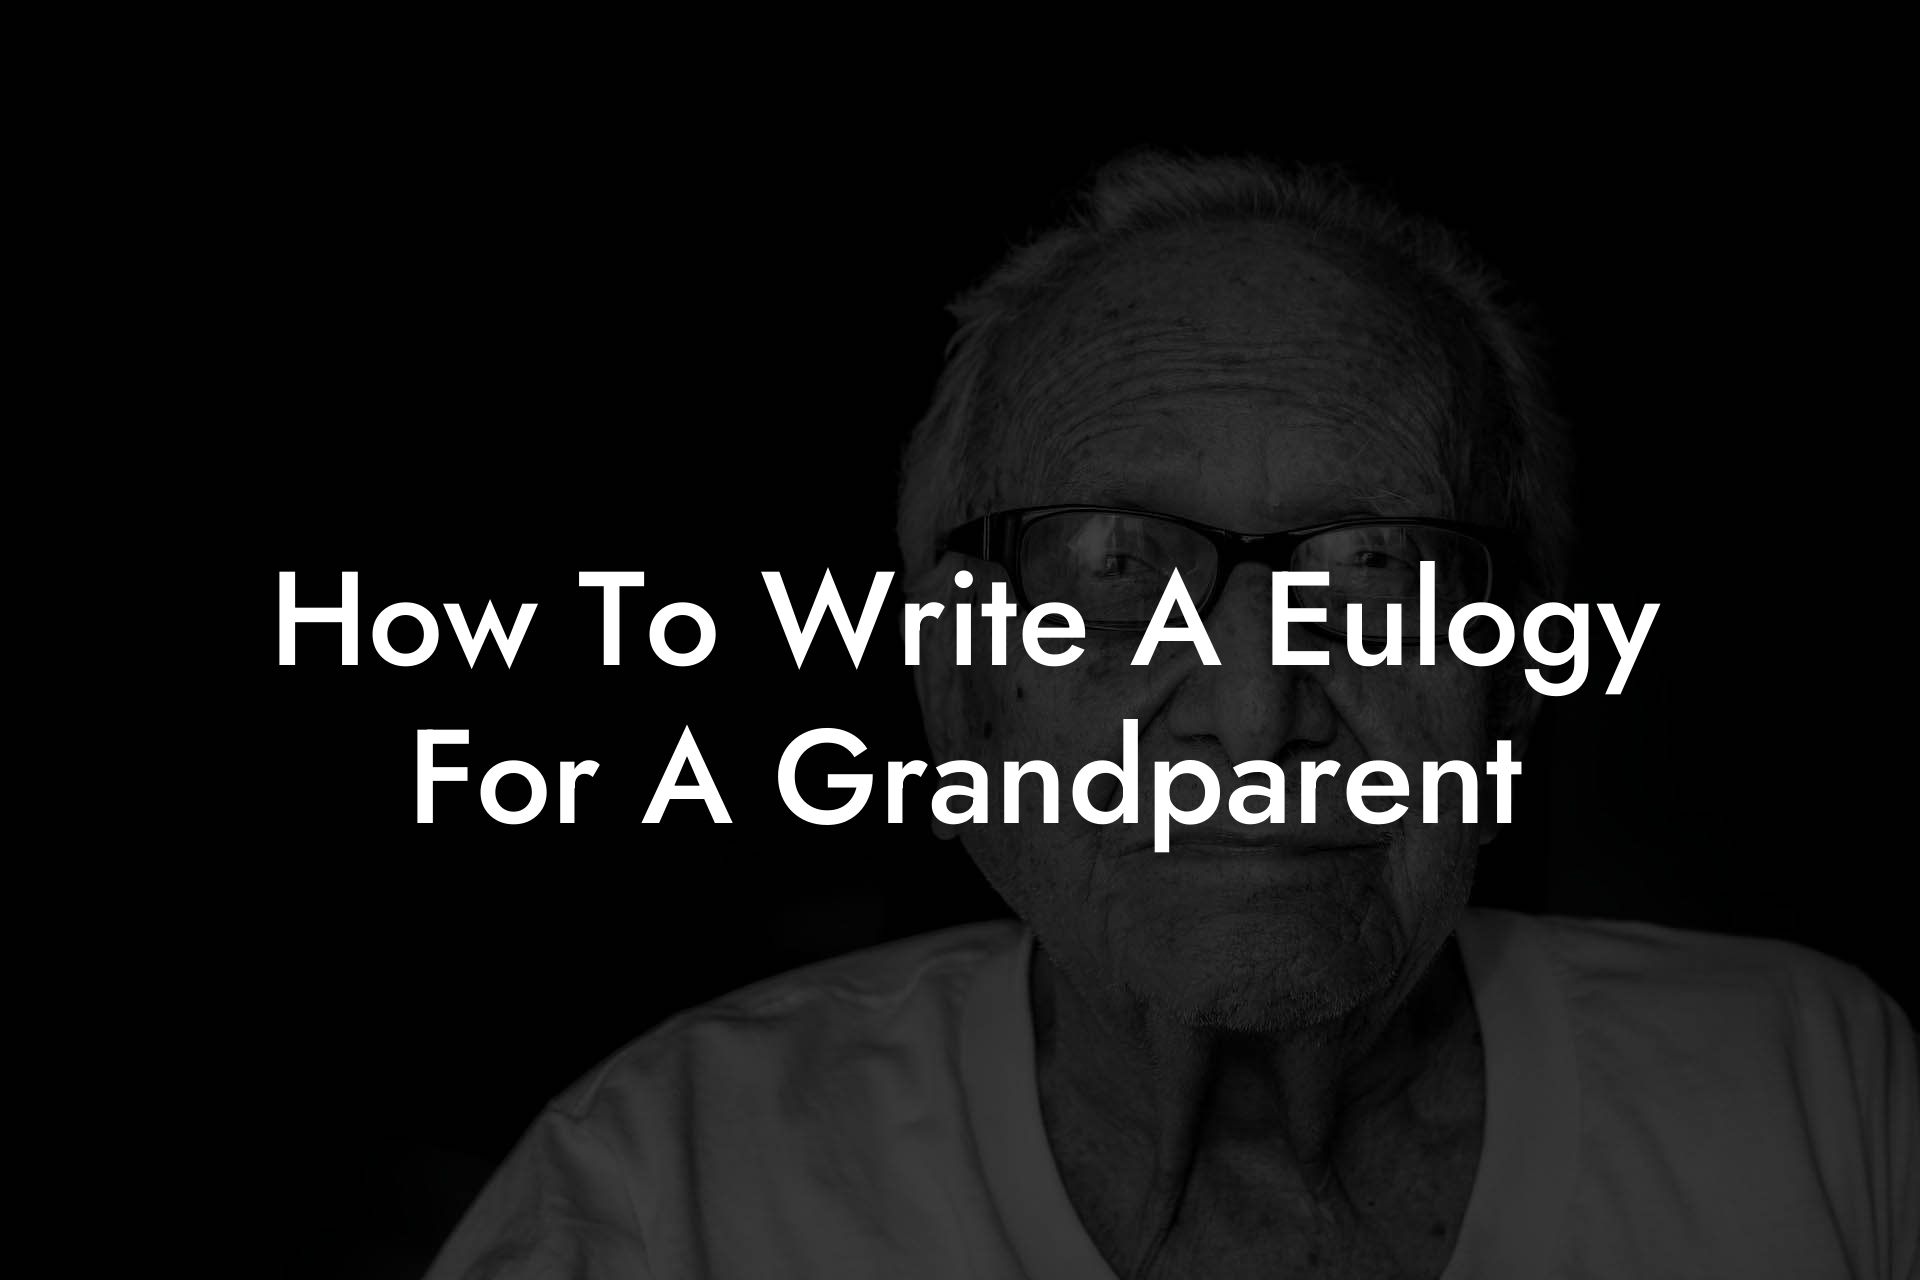 How To Write A Eulogy For A Grandparent